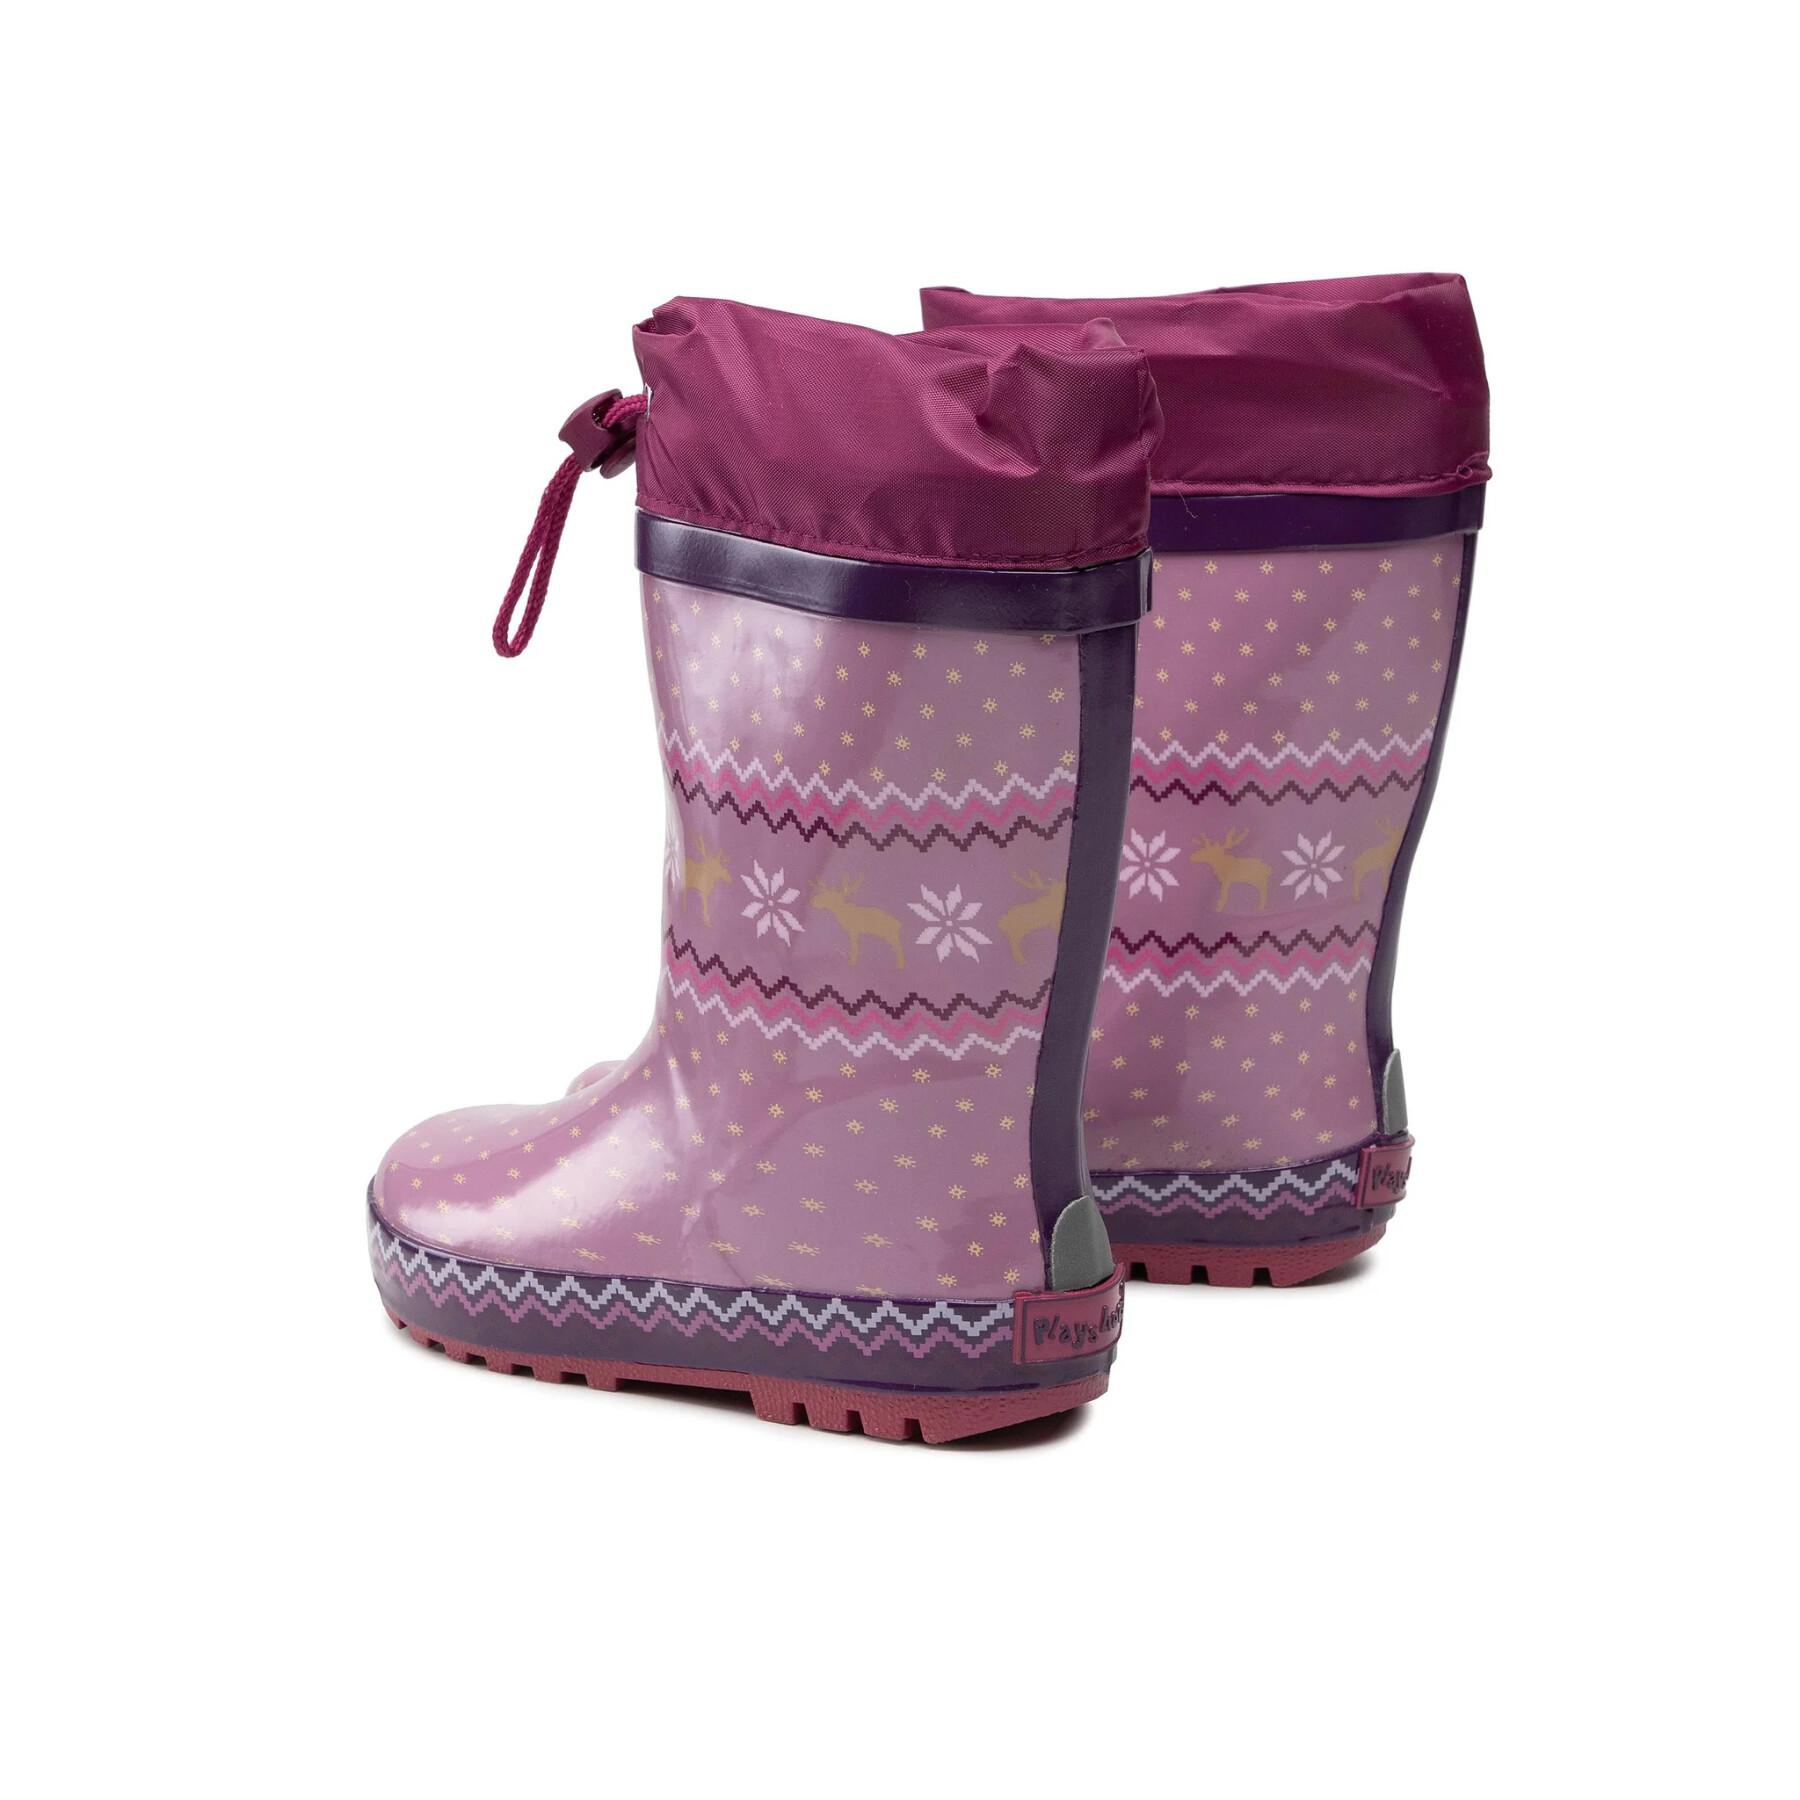 Children's rubber rain boots Playshoes Norway Lined